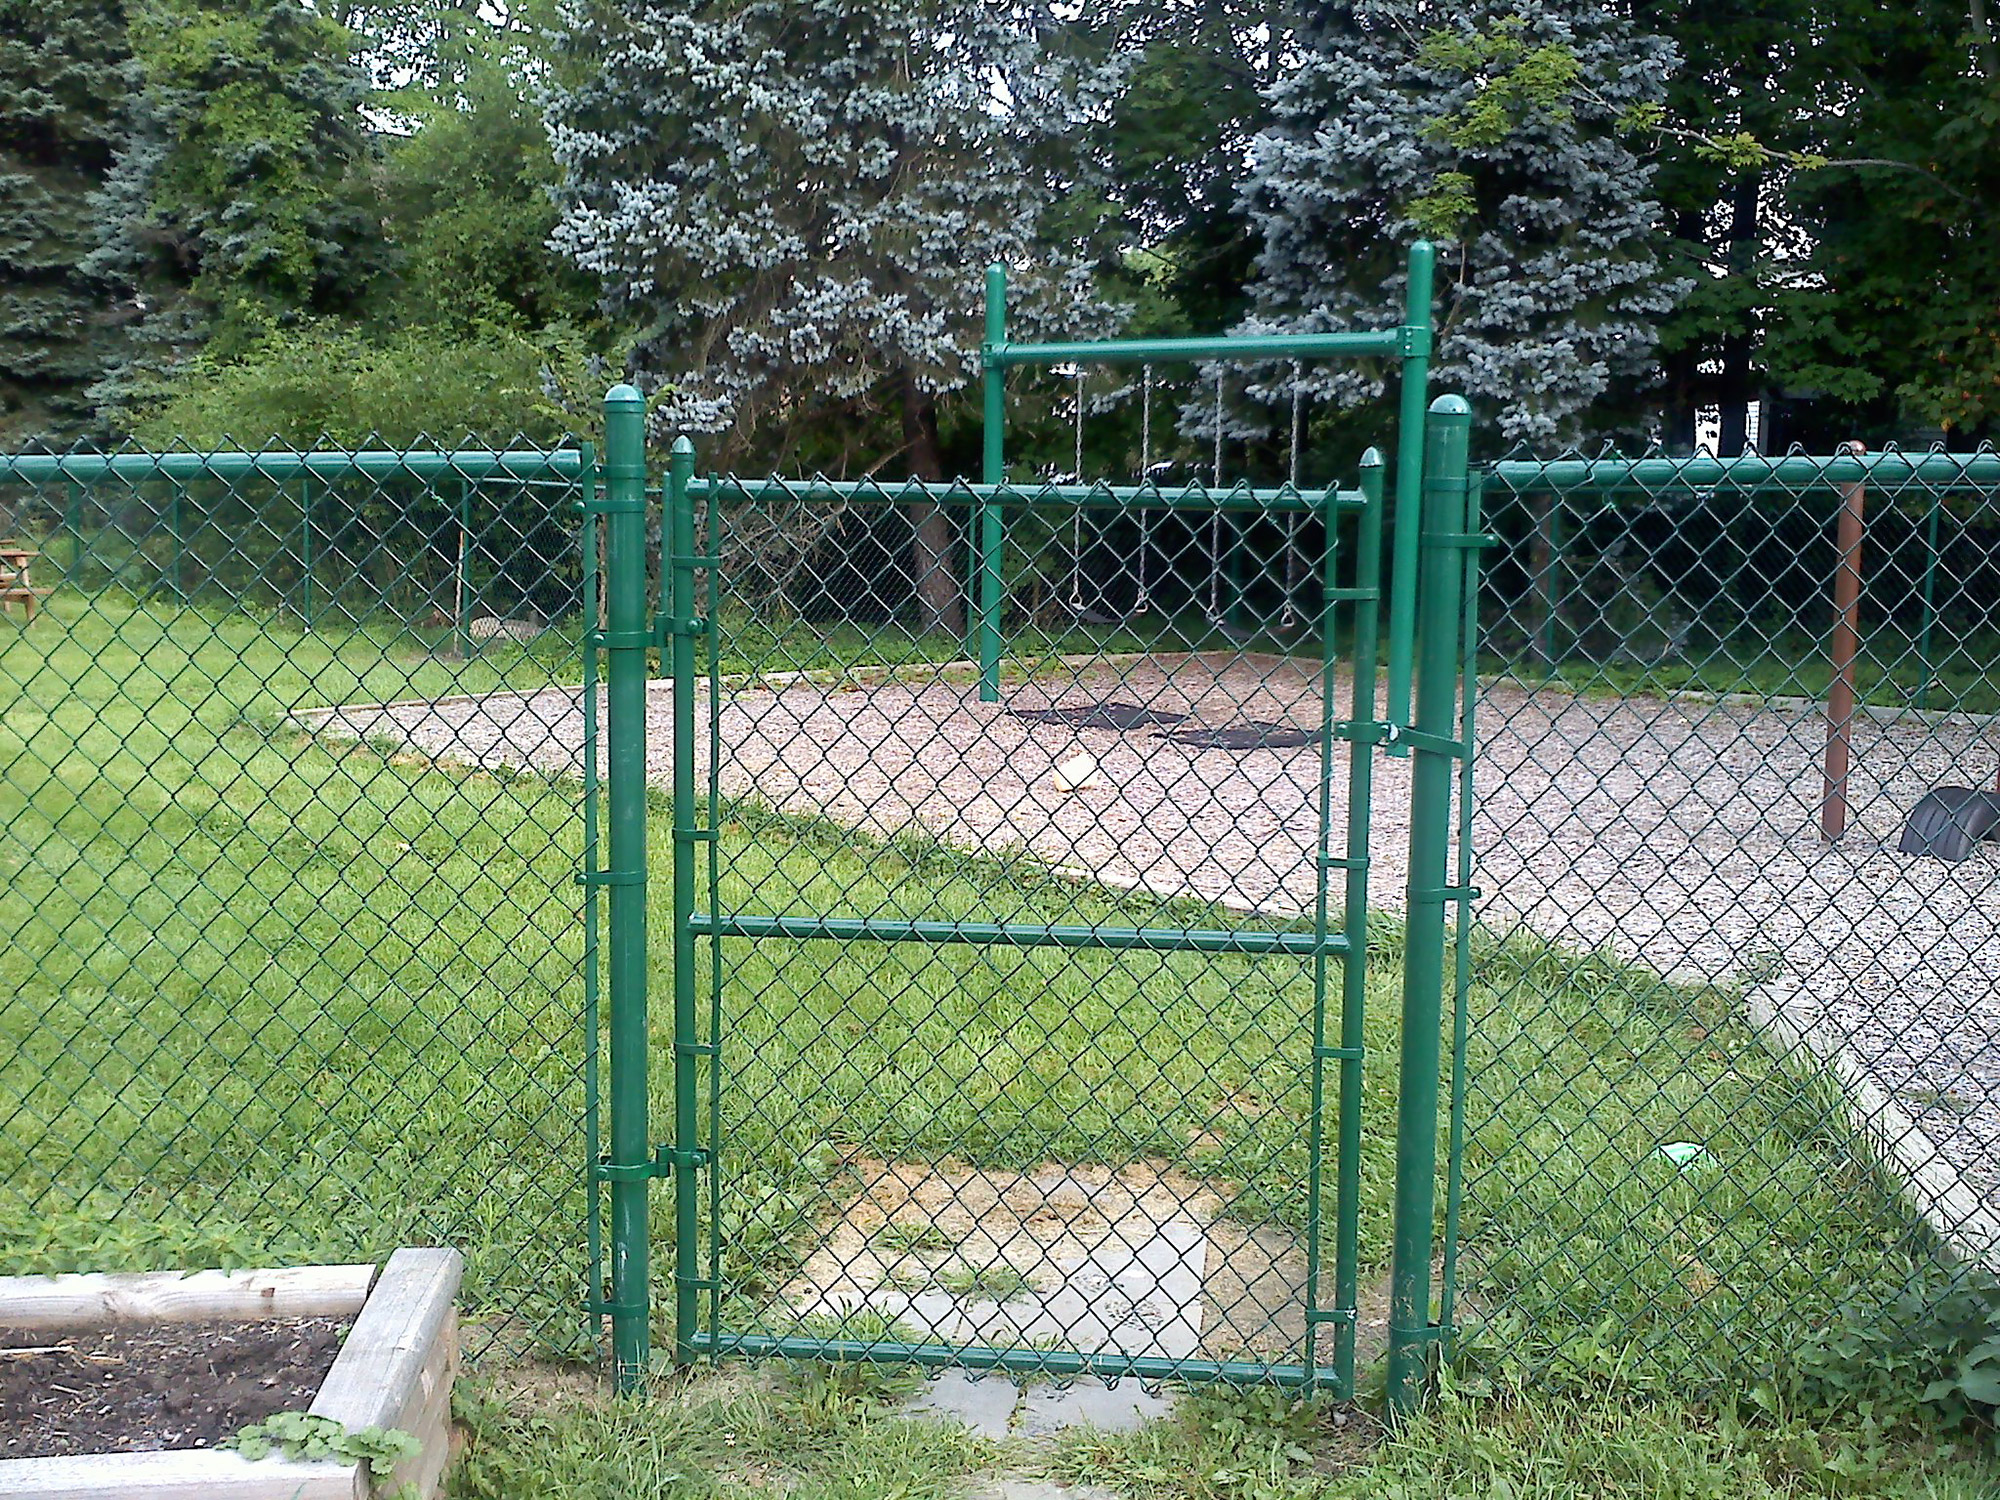 A green gate in a fenced area, safeguarded by chain link.